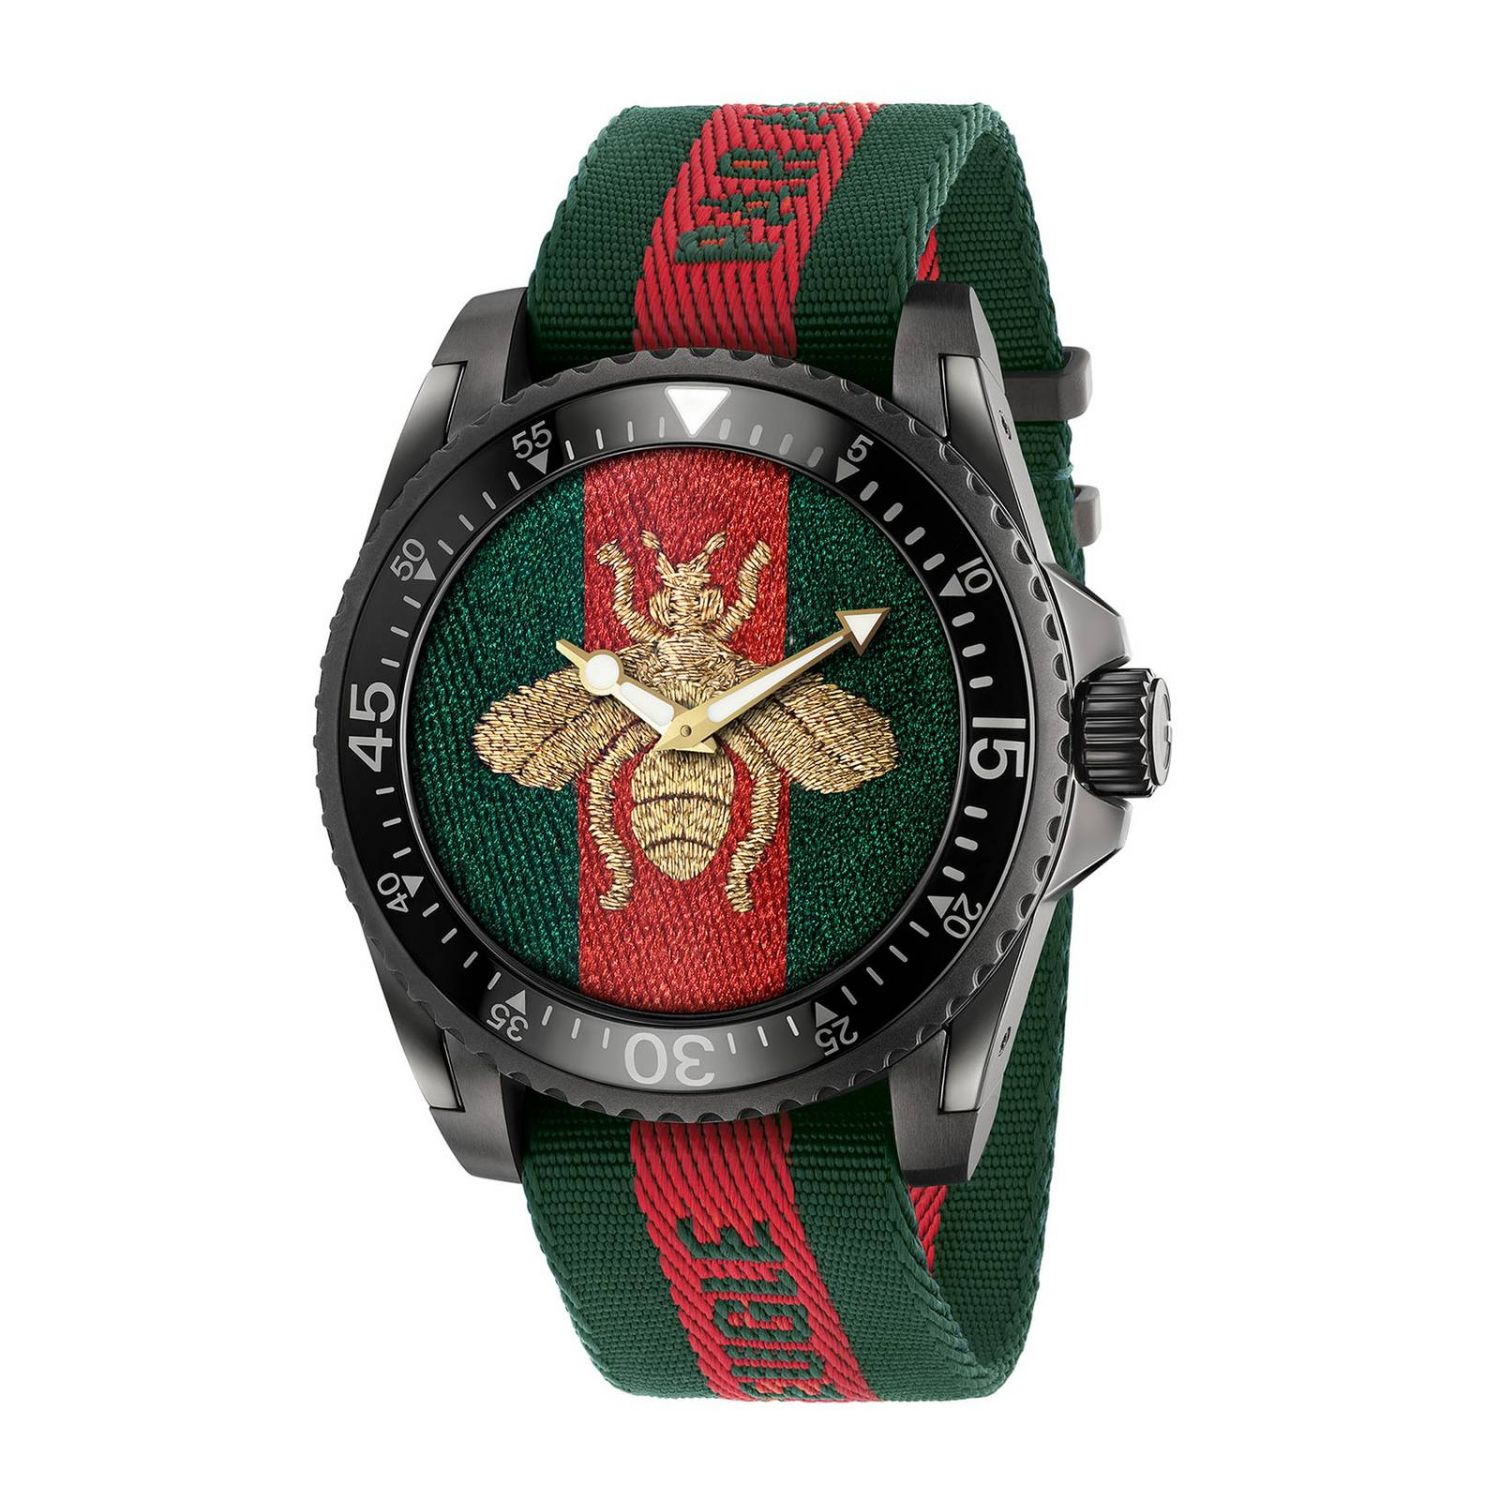 Watch Gucci: Le Marché des Merveilles watch case 38mm with Bee Web pattern green 1